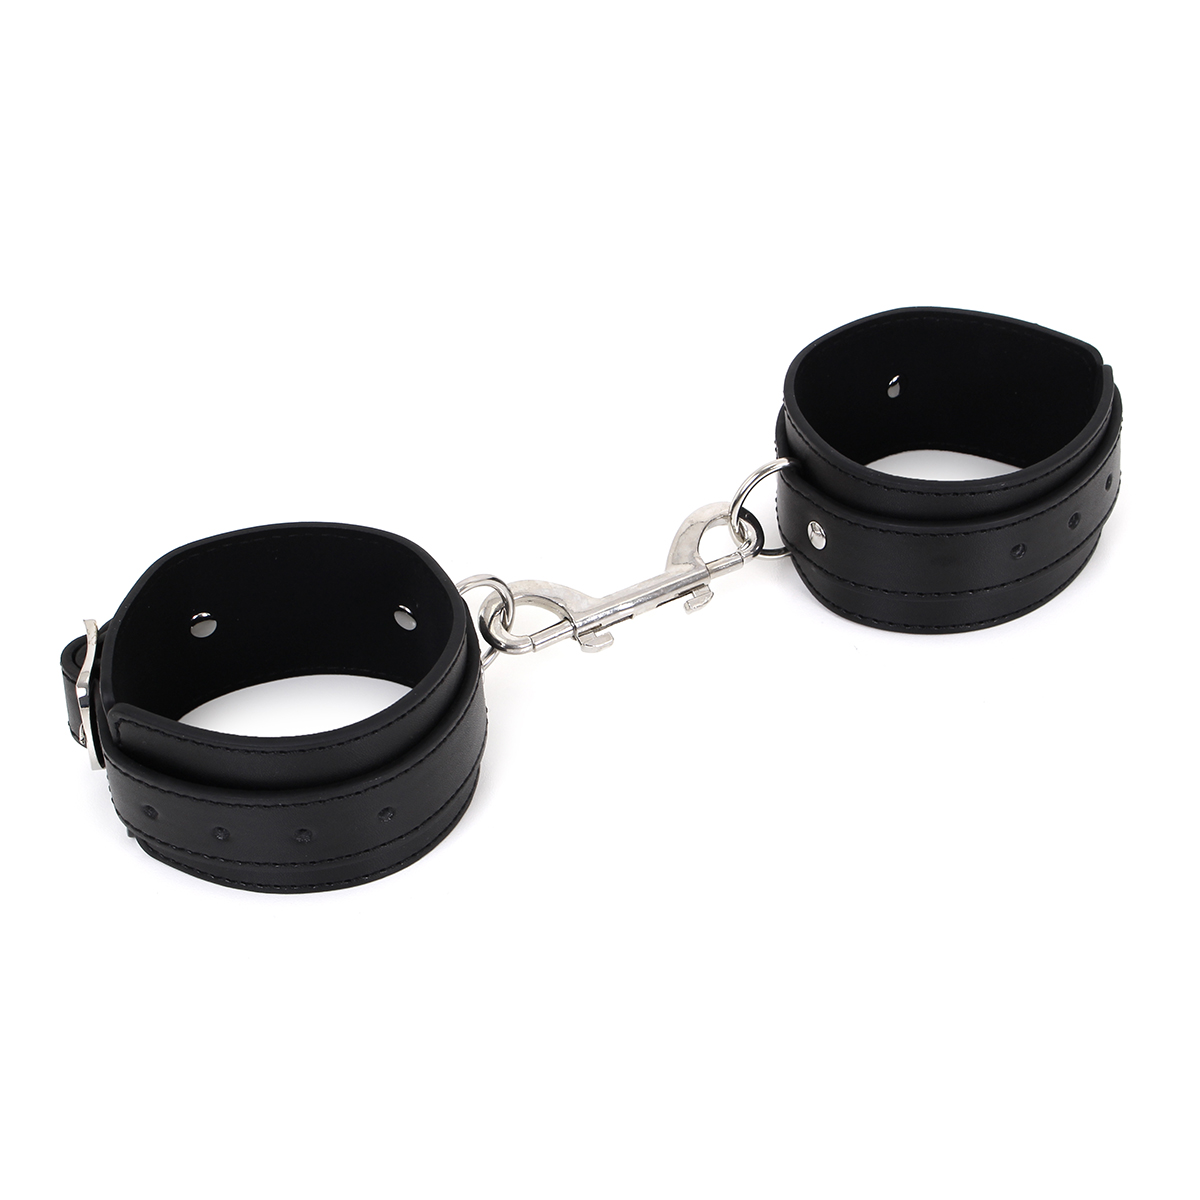 Budget-Ankle-Cuffs-with-Double-Hook-OPR-321061-1